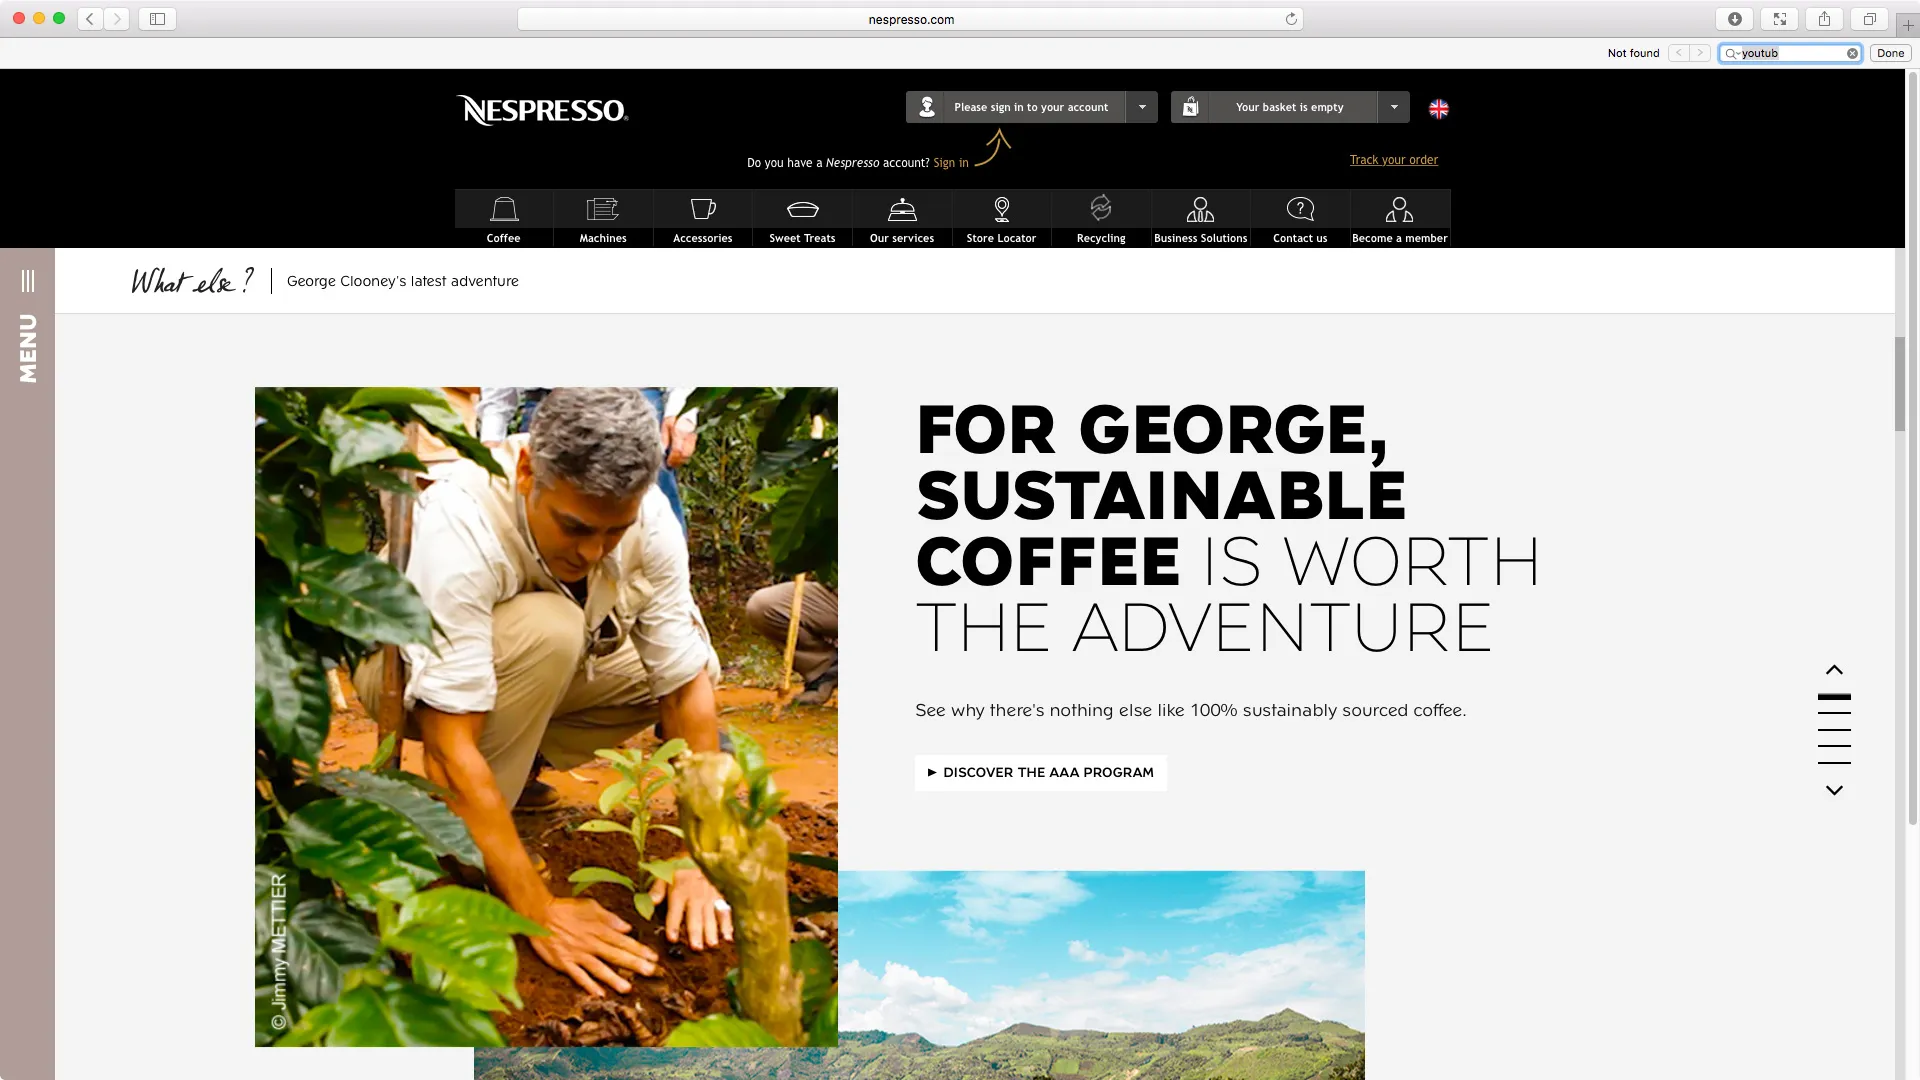 Designs for a Nespresso website featuring George Clooney